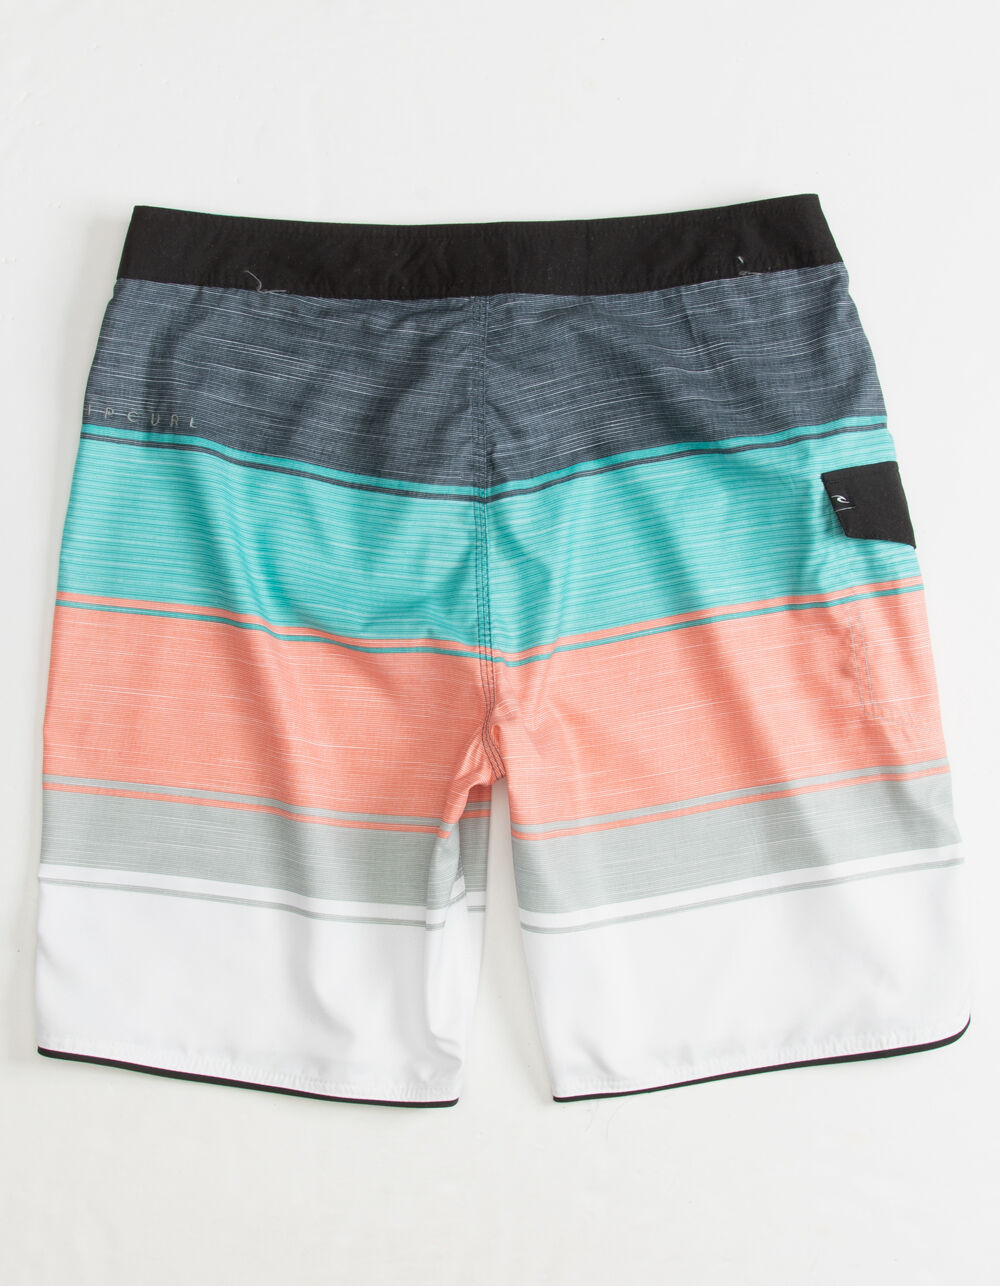 RIP CURL State Park 4.0 Mens Boardshorts - CORAL | Tillys